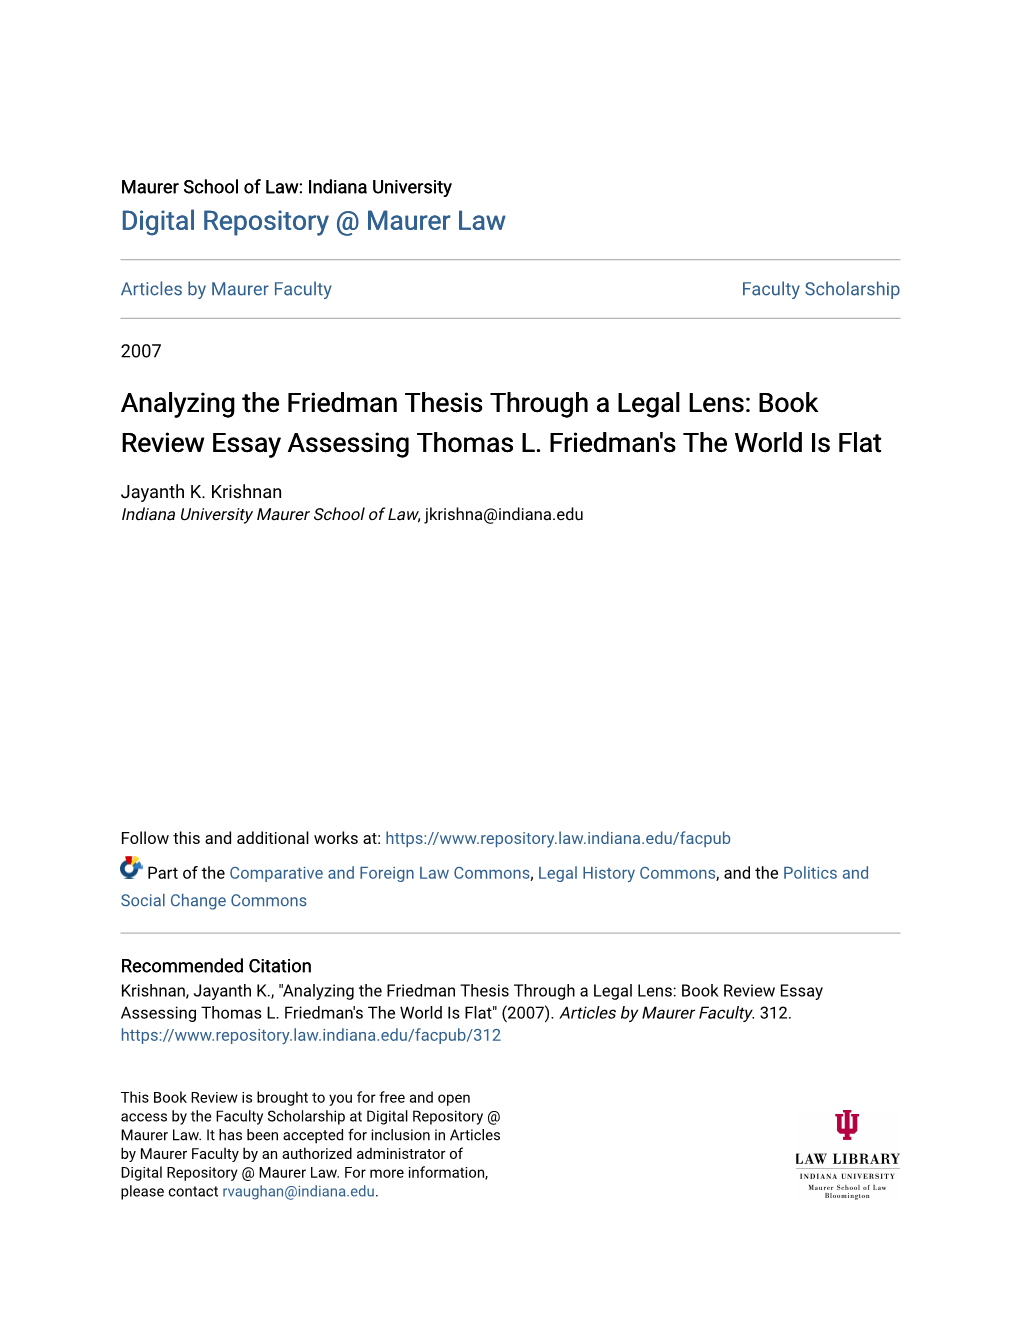 Analyzing the Friedman Thesis Through a Legal Lens: Book Review Essay Assessing Thomas L